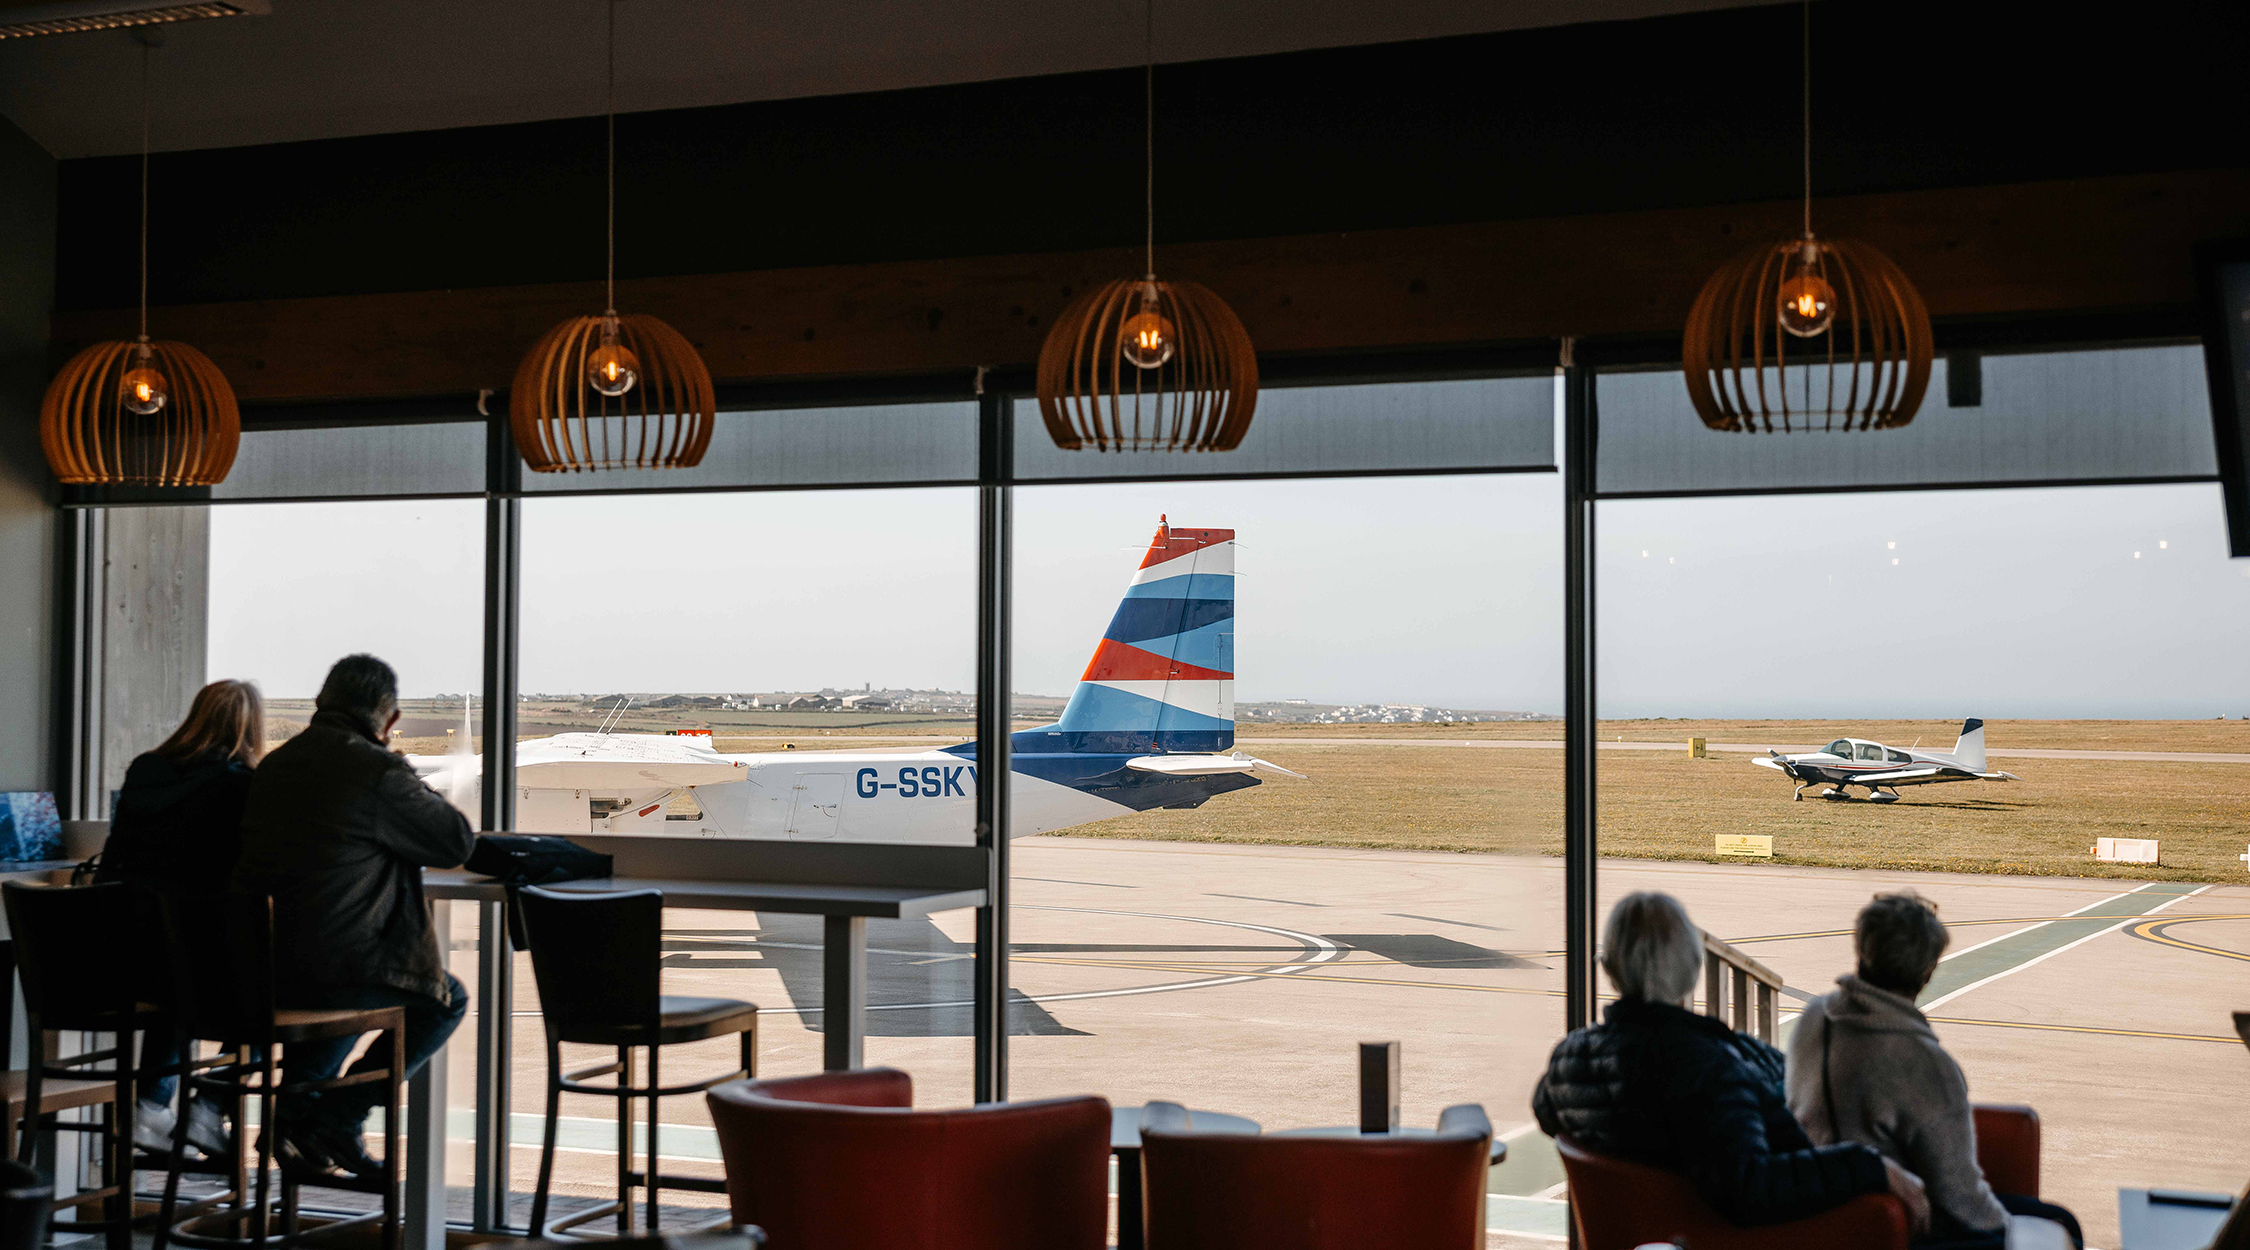 view of land's end airport airfield from the cafe